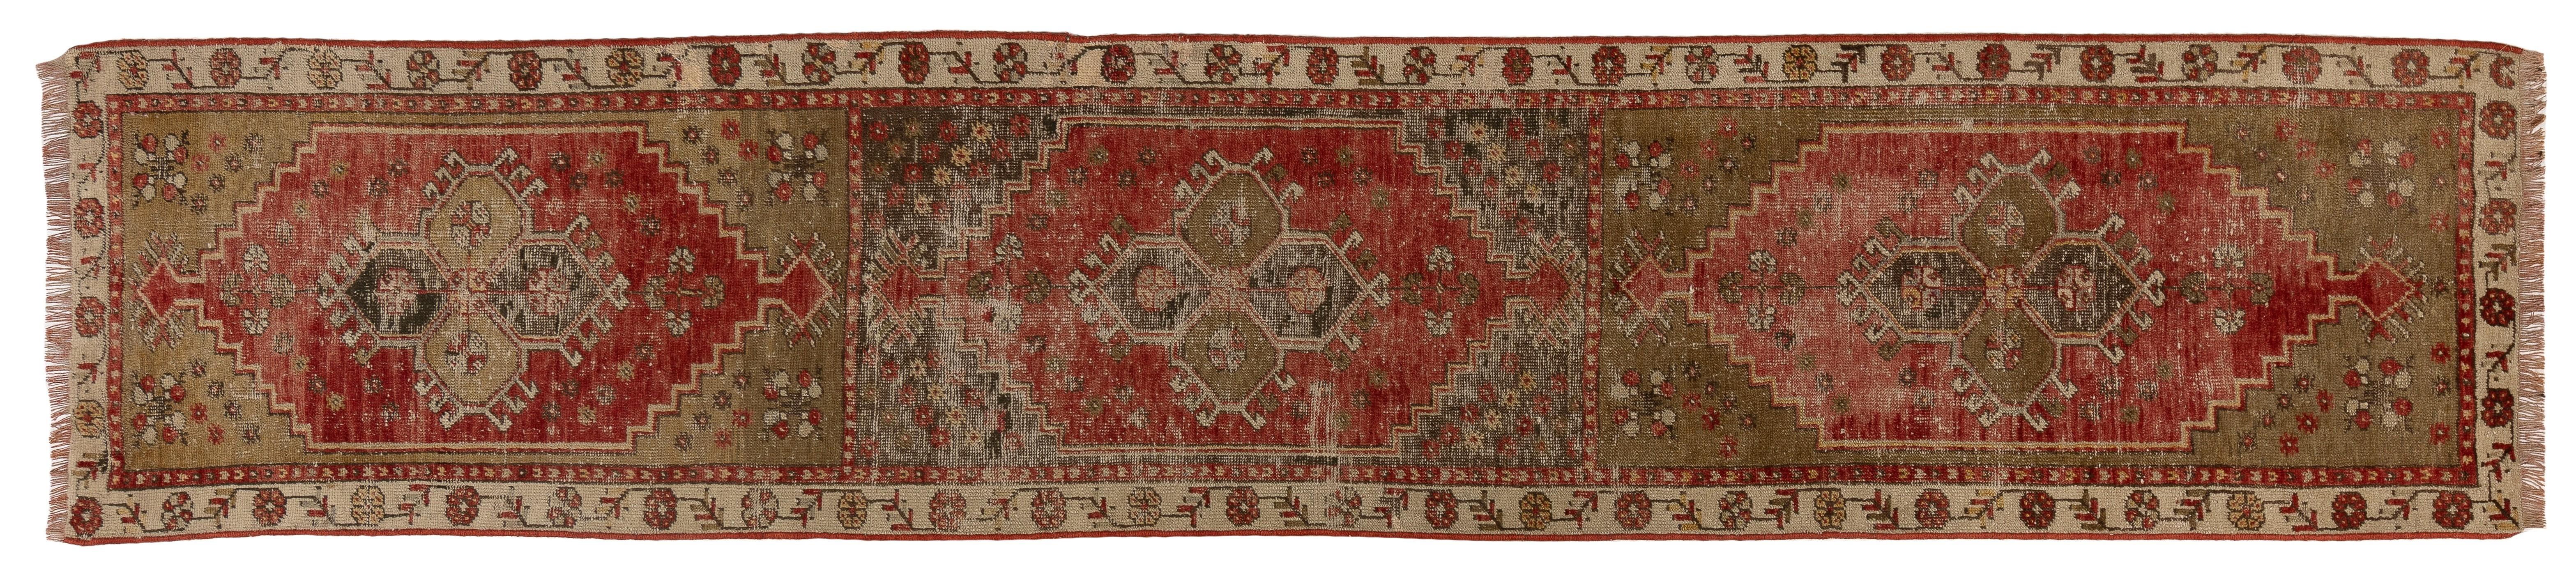 Hand-Knotted Antique Oushak Runner, Unusual Wool Hand Knotted Rug